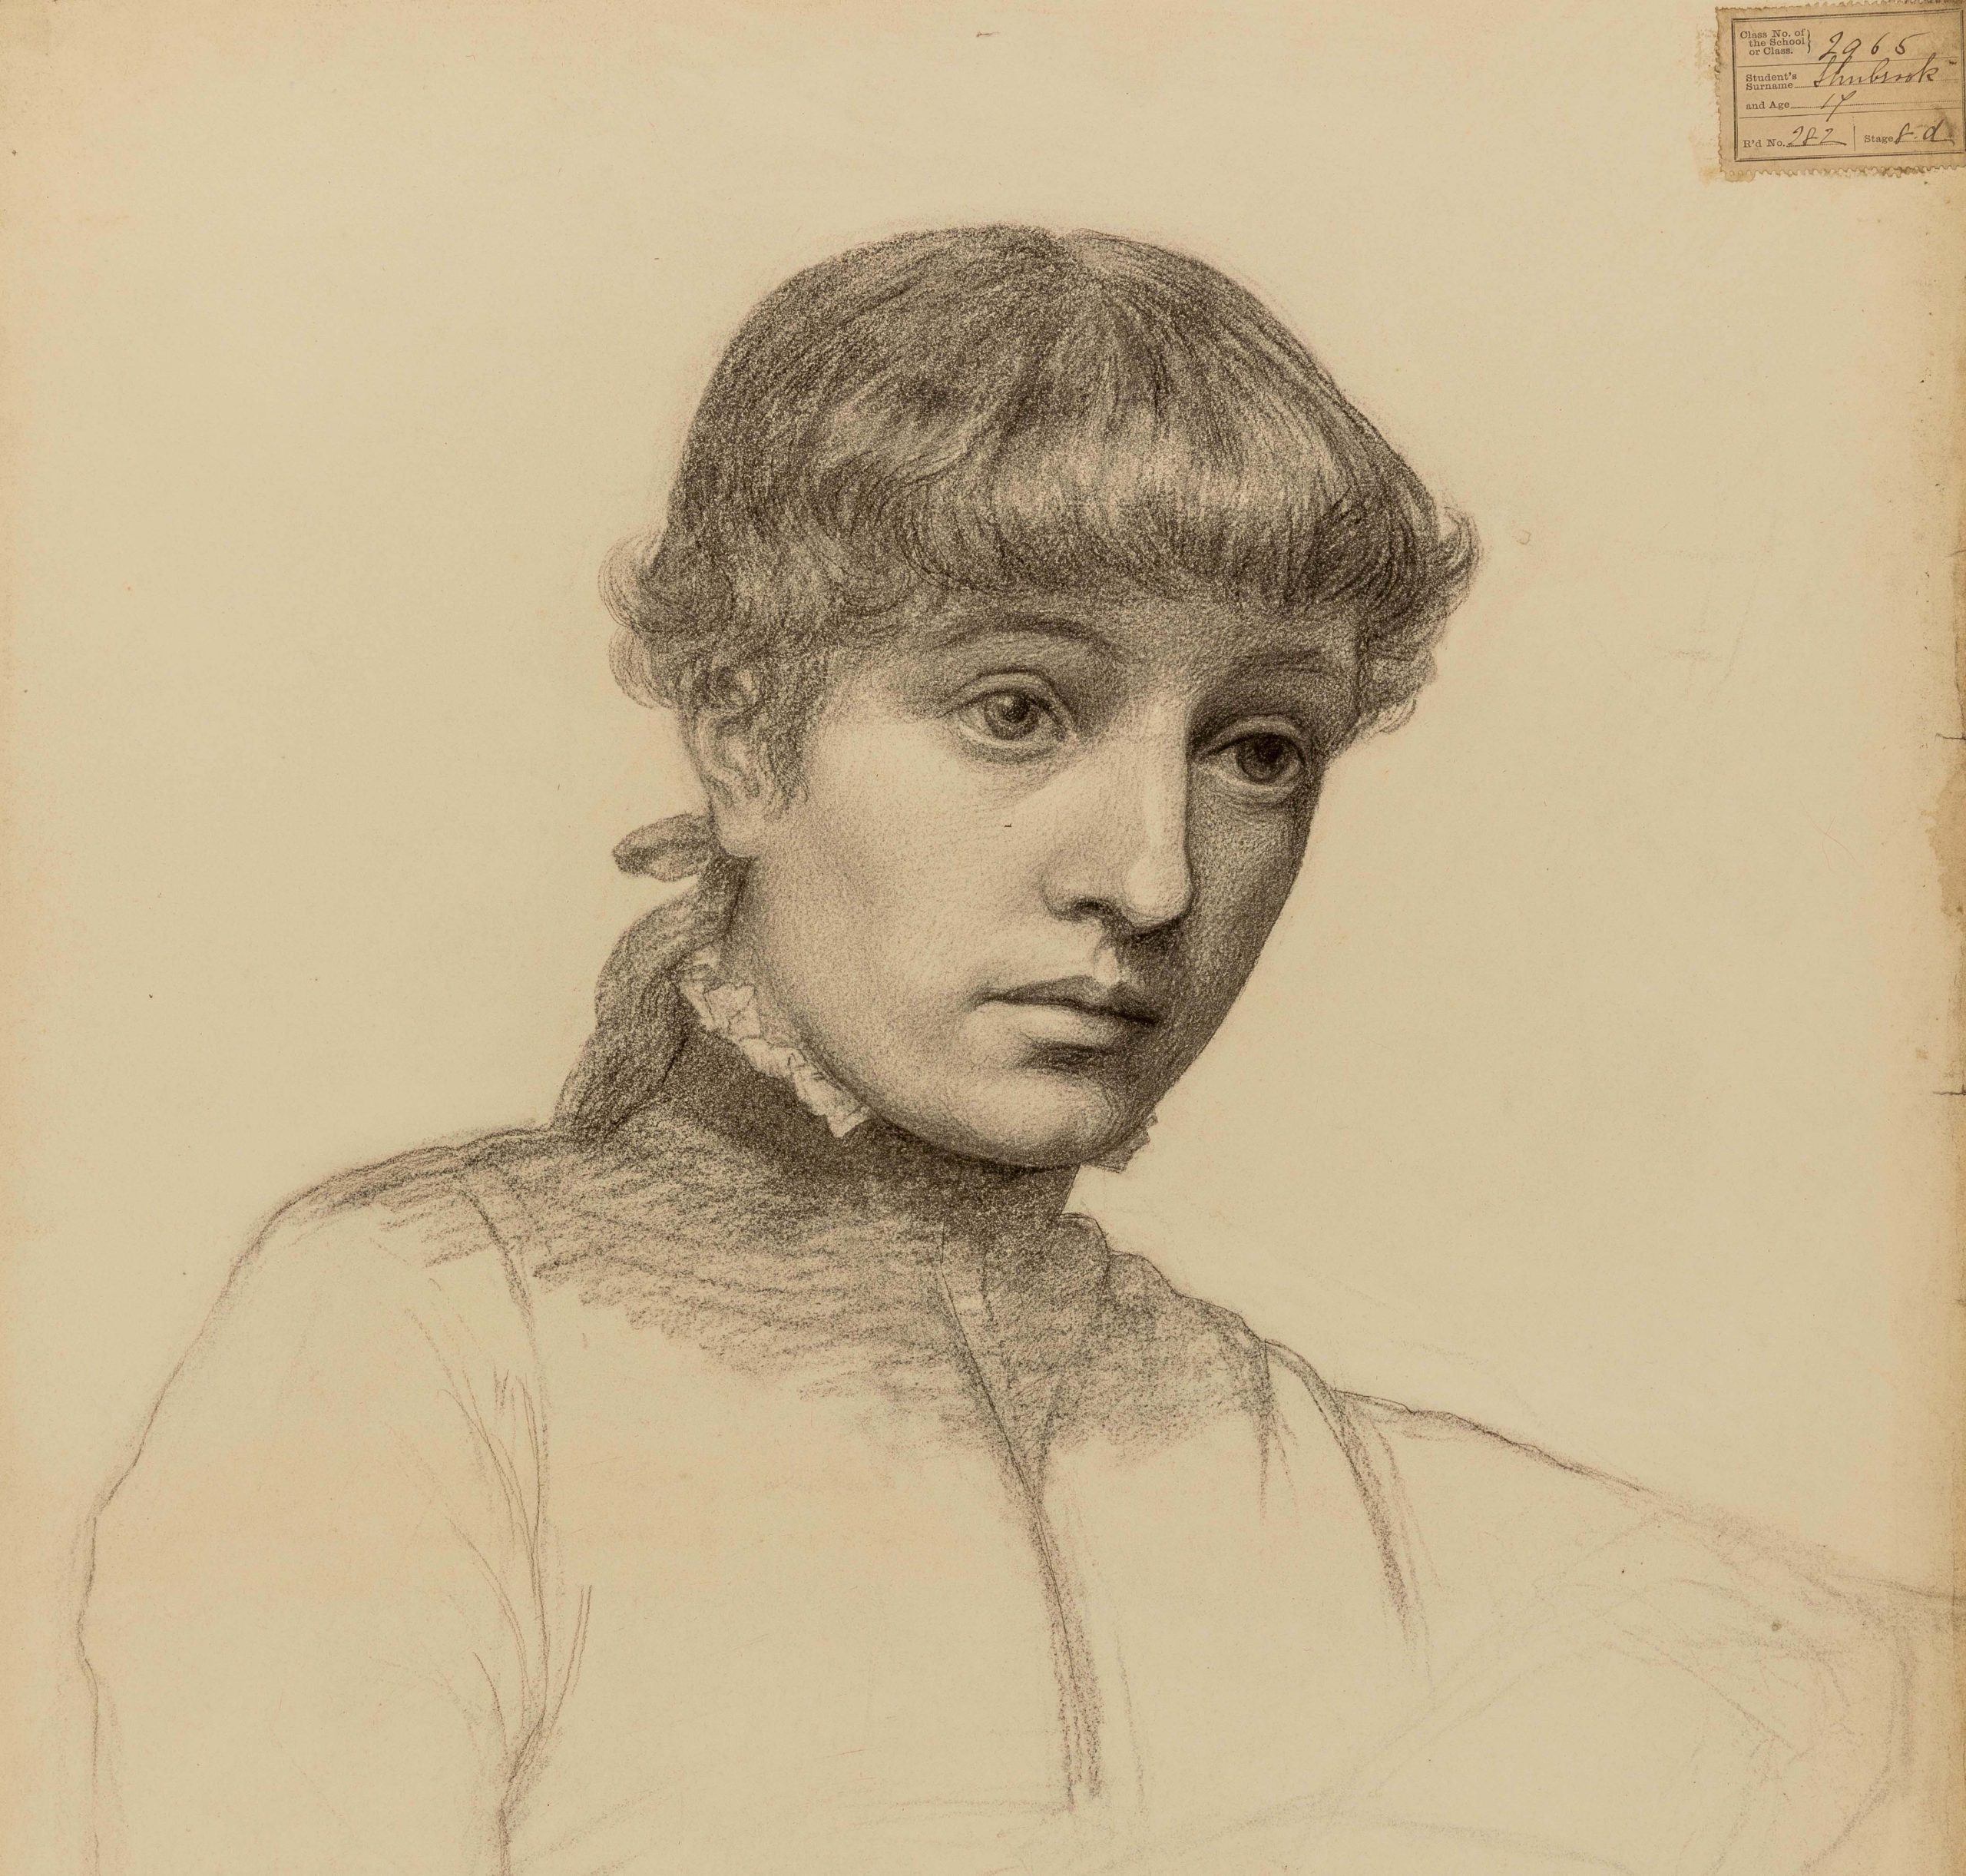 Bust-length portrait of a young woman